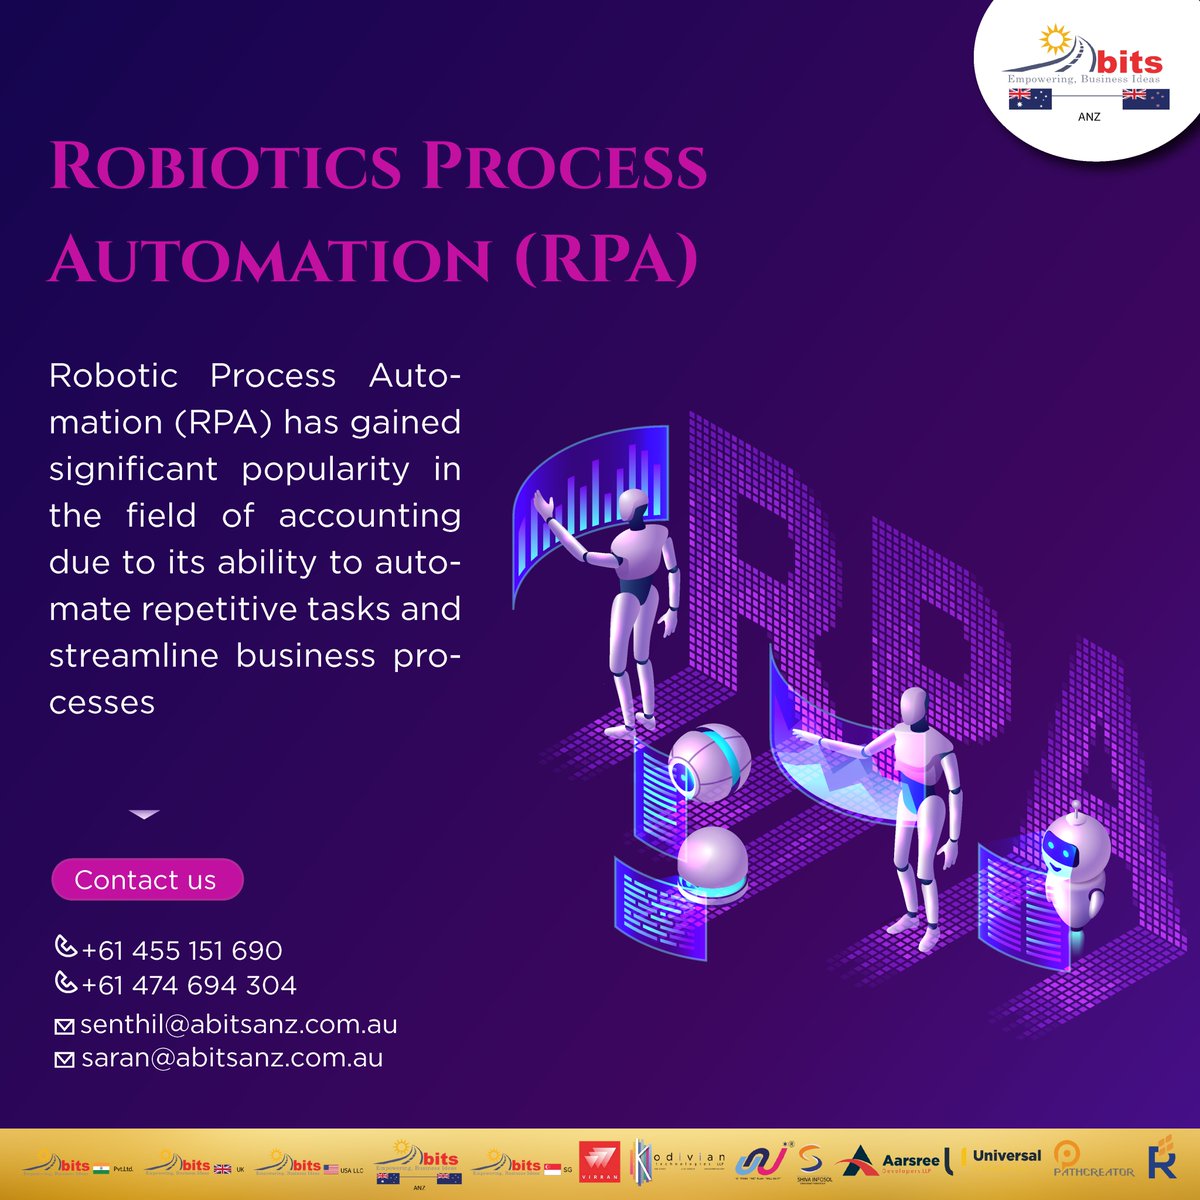 Our Robotic Process Automation...
#rpa #rpadeveloper #rpadevelopers #rpajobs #rpacommunity #rpaanalyst #virran #ssgroup #ssgroupofcompanies #techcareers #techbusiness #robotics #automation